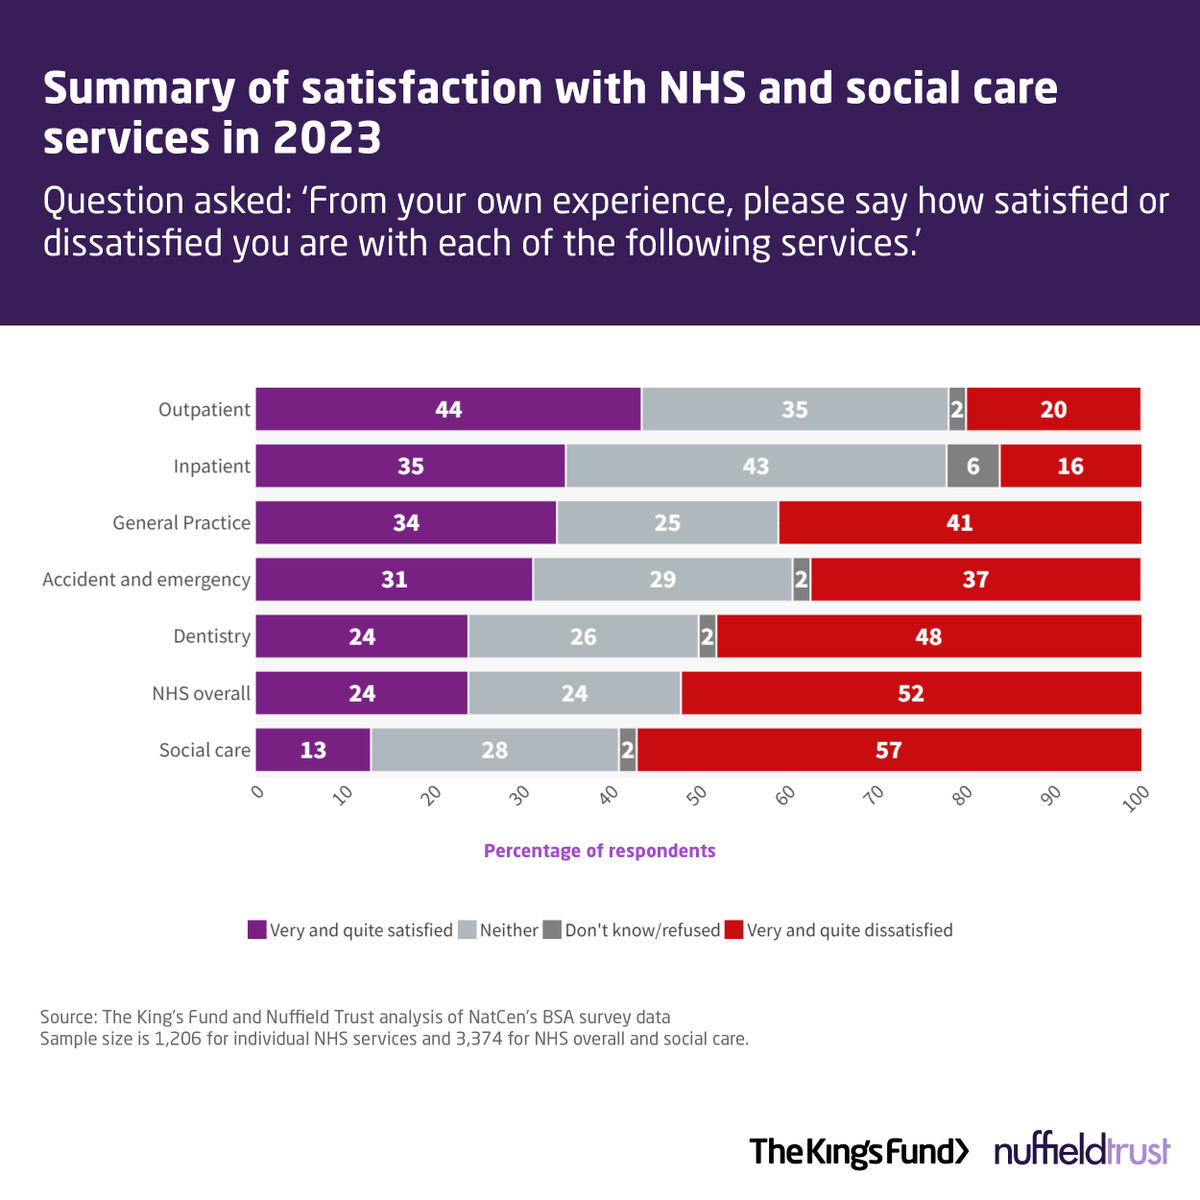 It's not only the #NHS overall that has been affected by low levels of satisfaction. Satisfaction is low for individual NHS and for #SocialCare services, with satisfaction for social care services at just 13%.